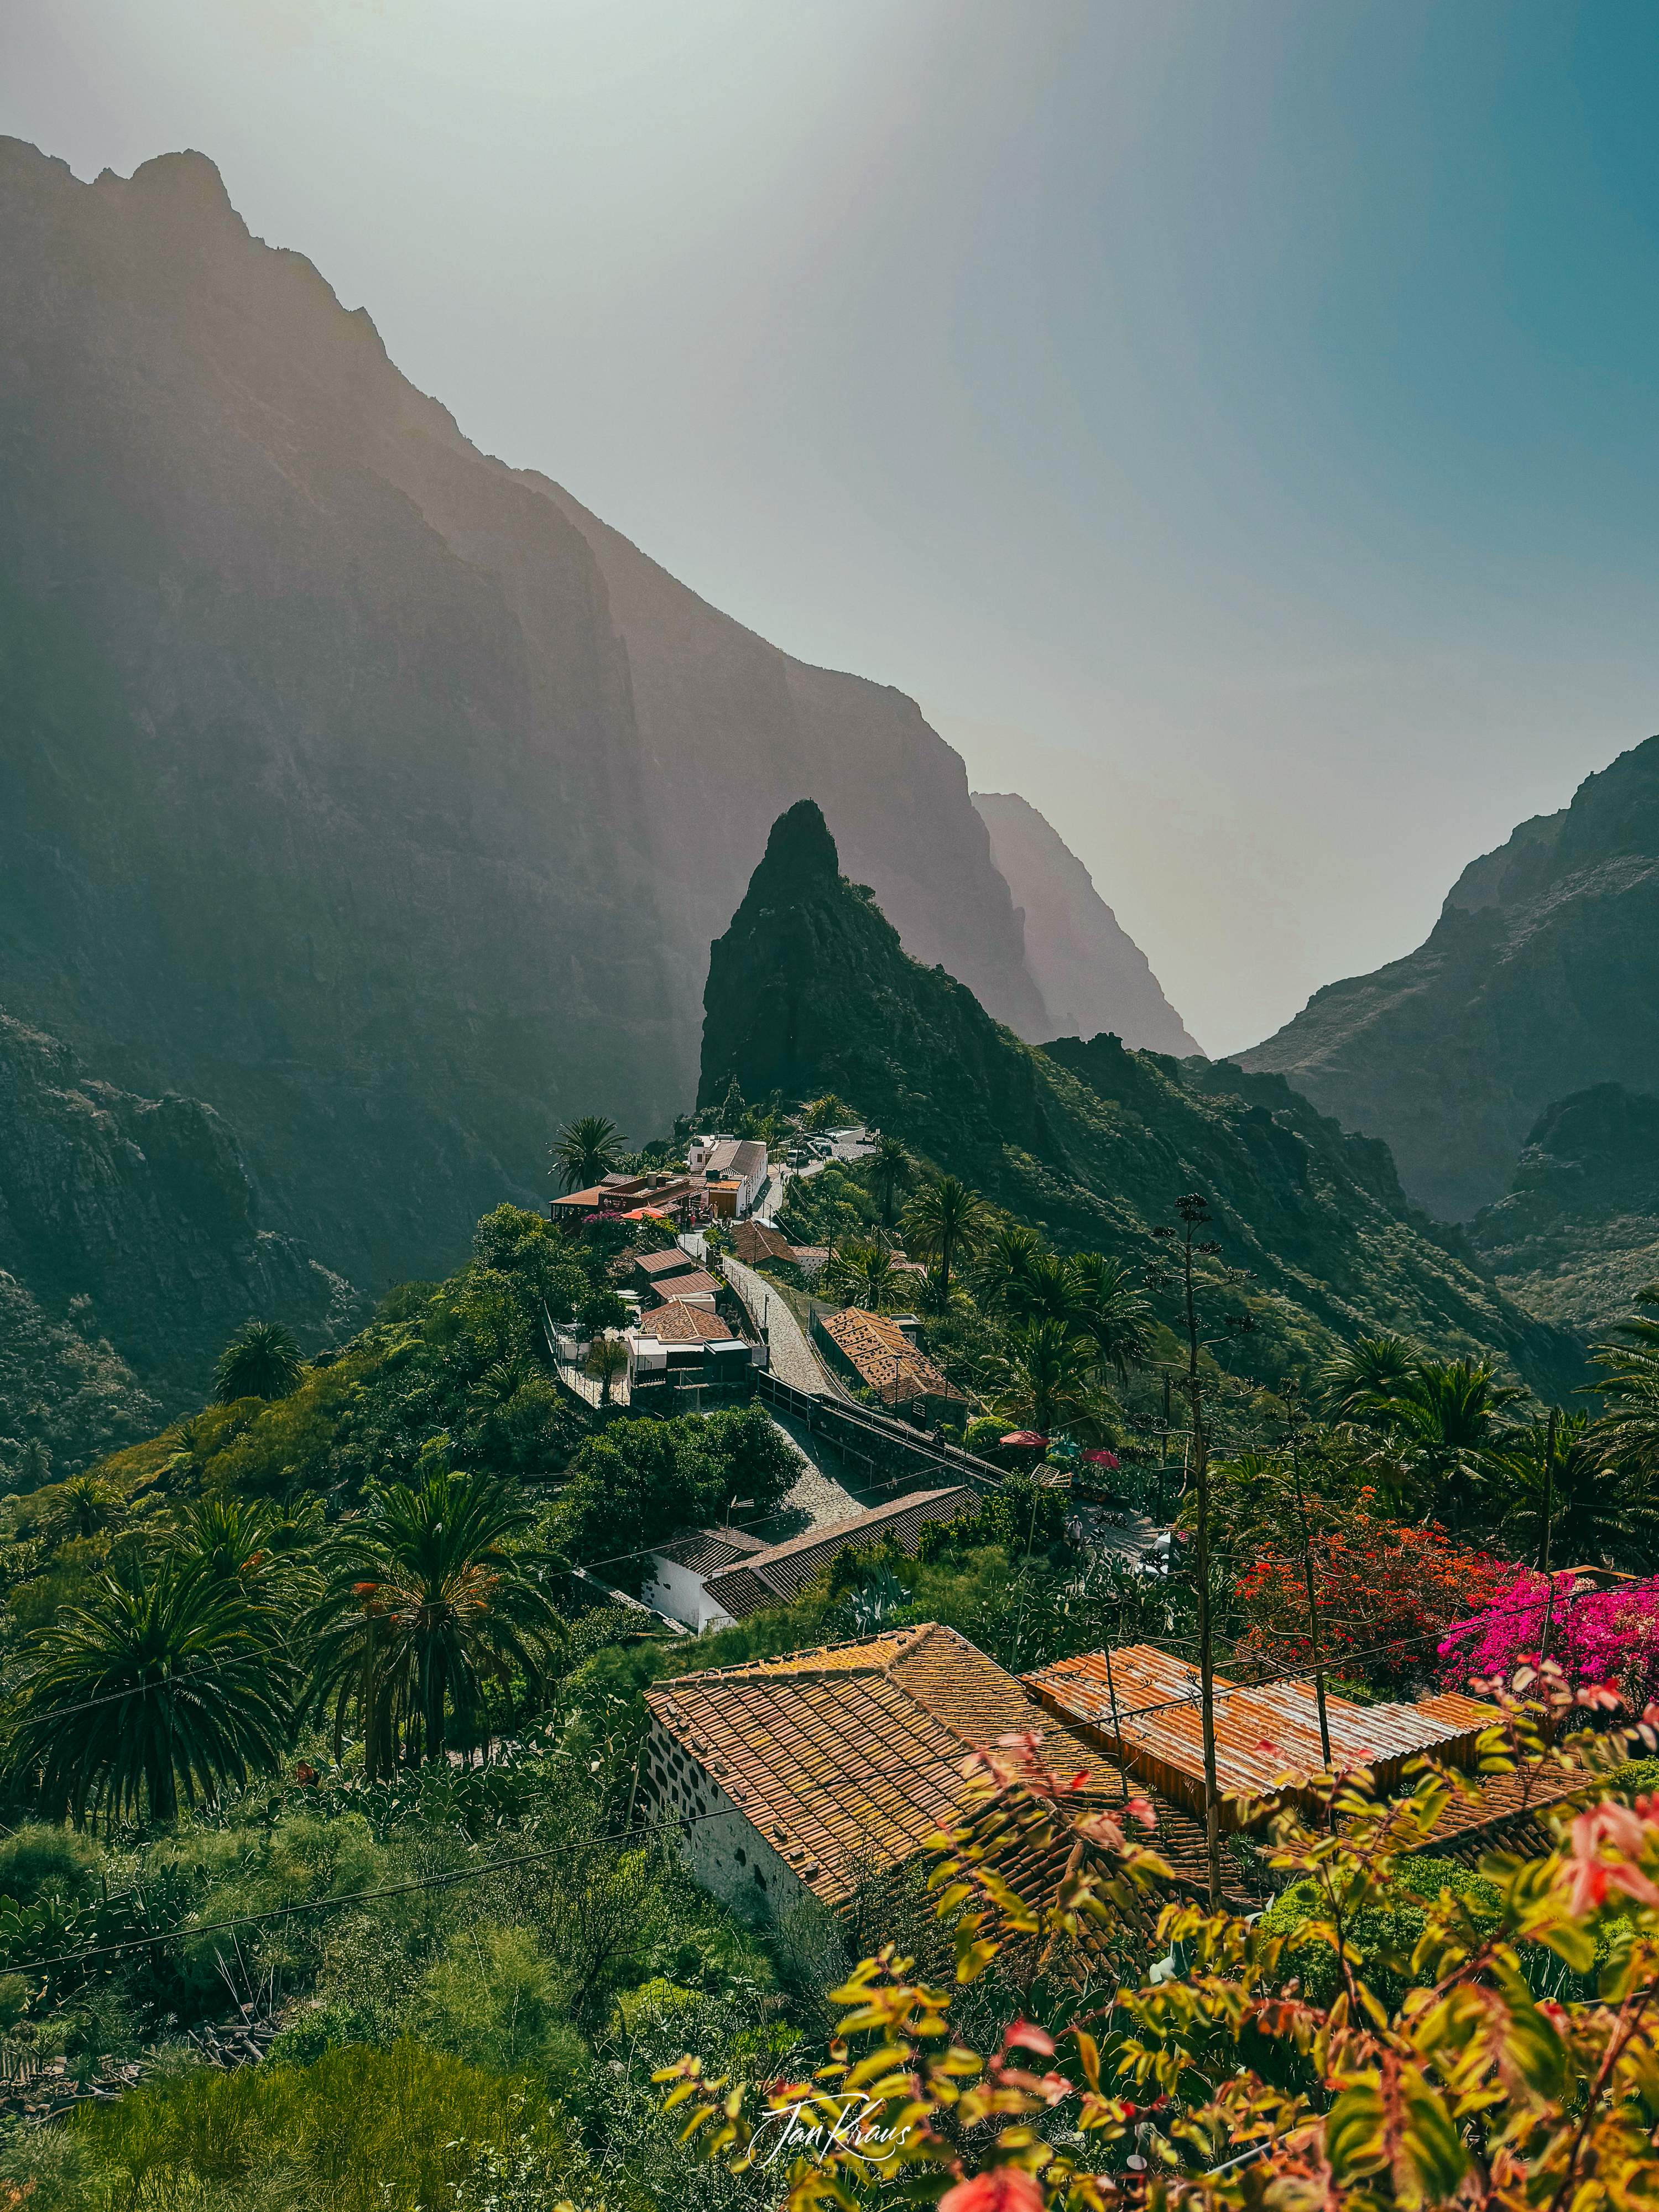 A view of Masca village, Tenerife, Canary Islands, Spain